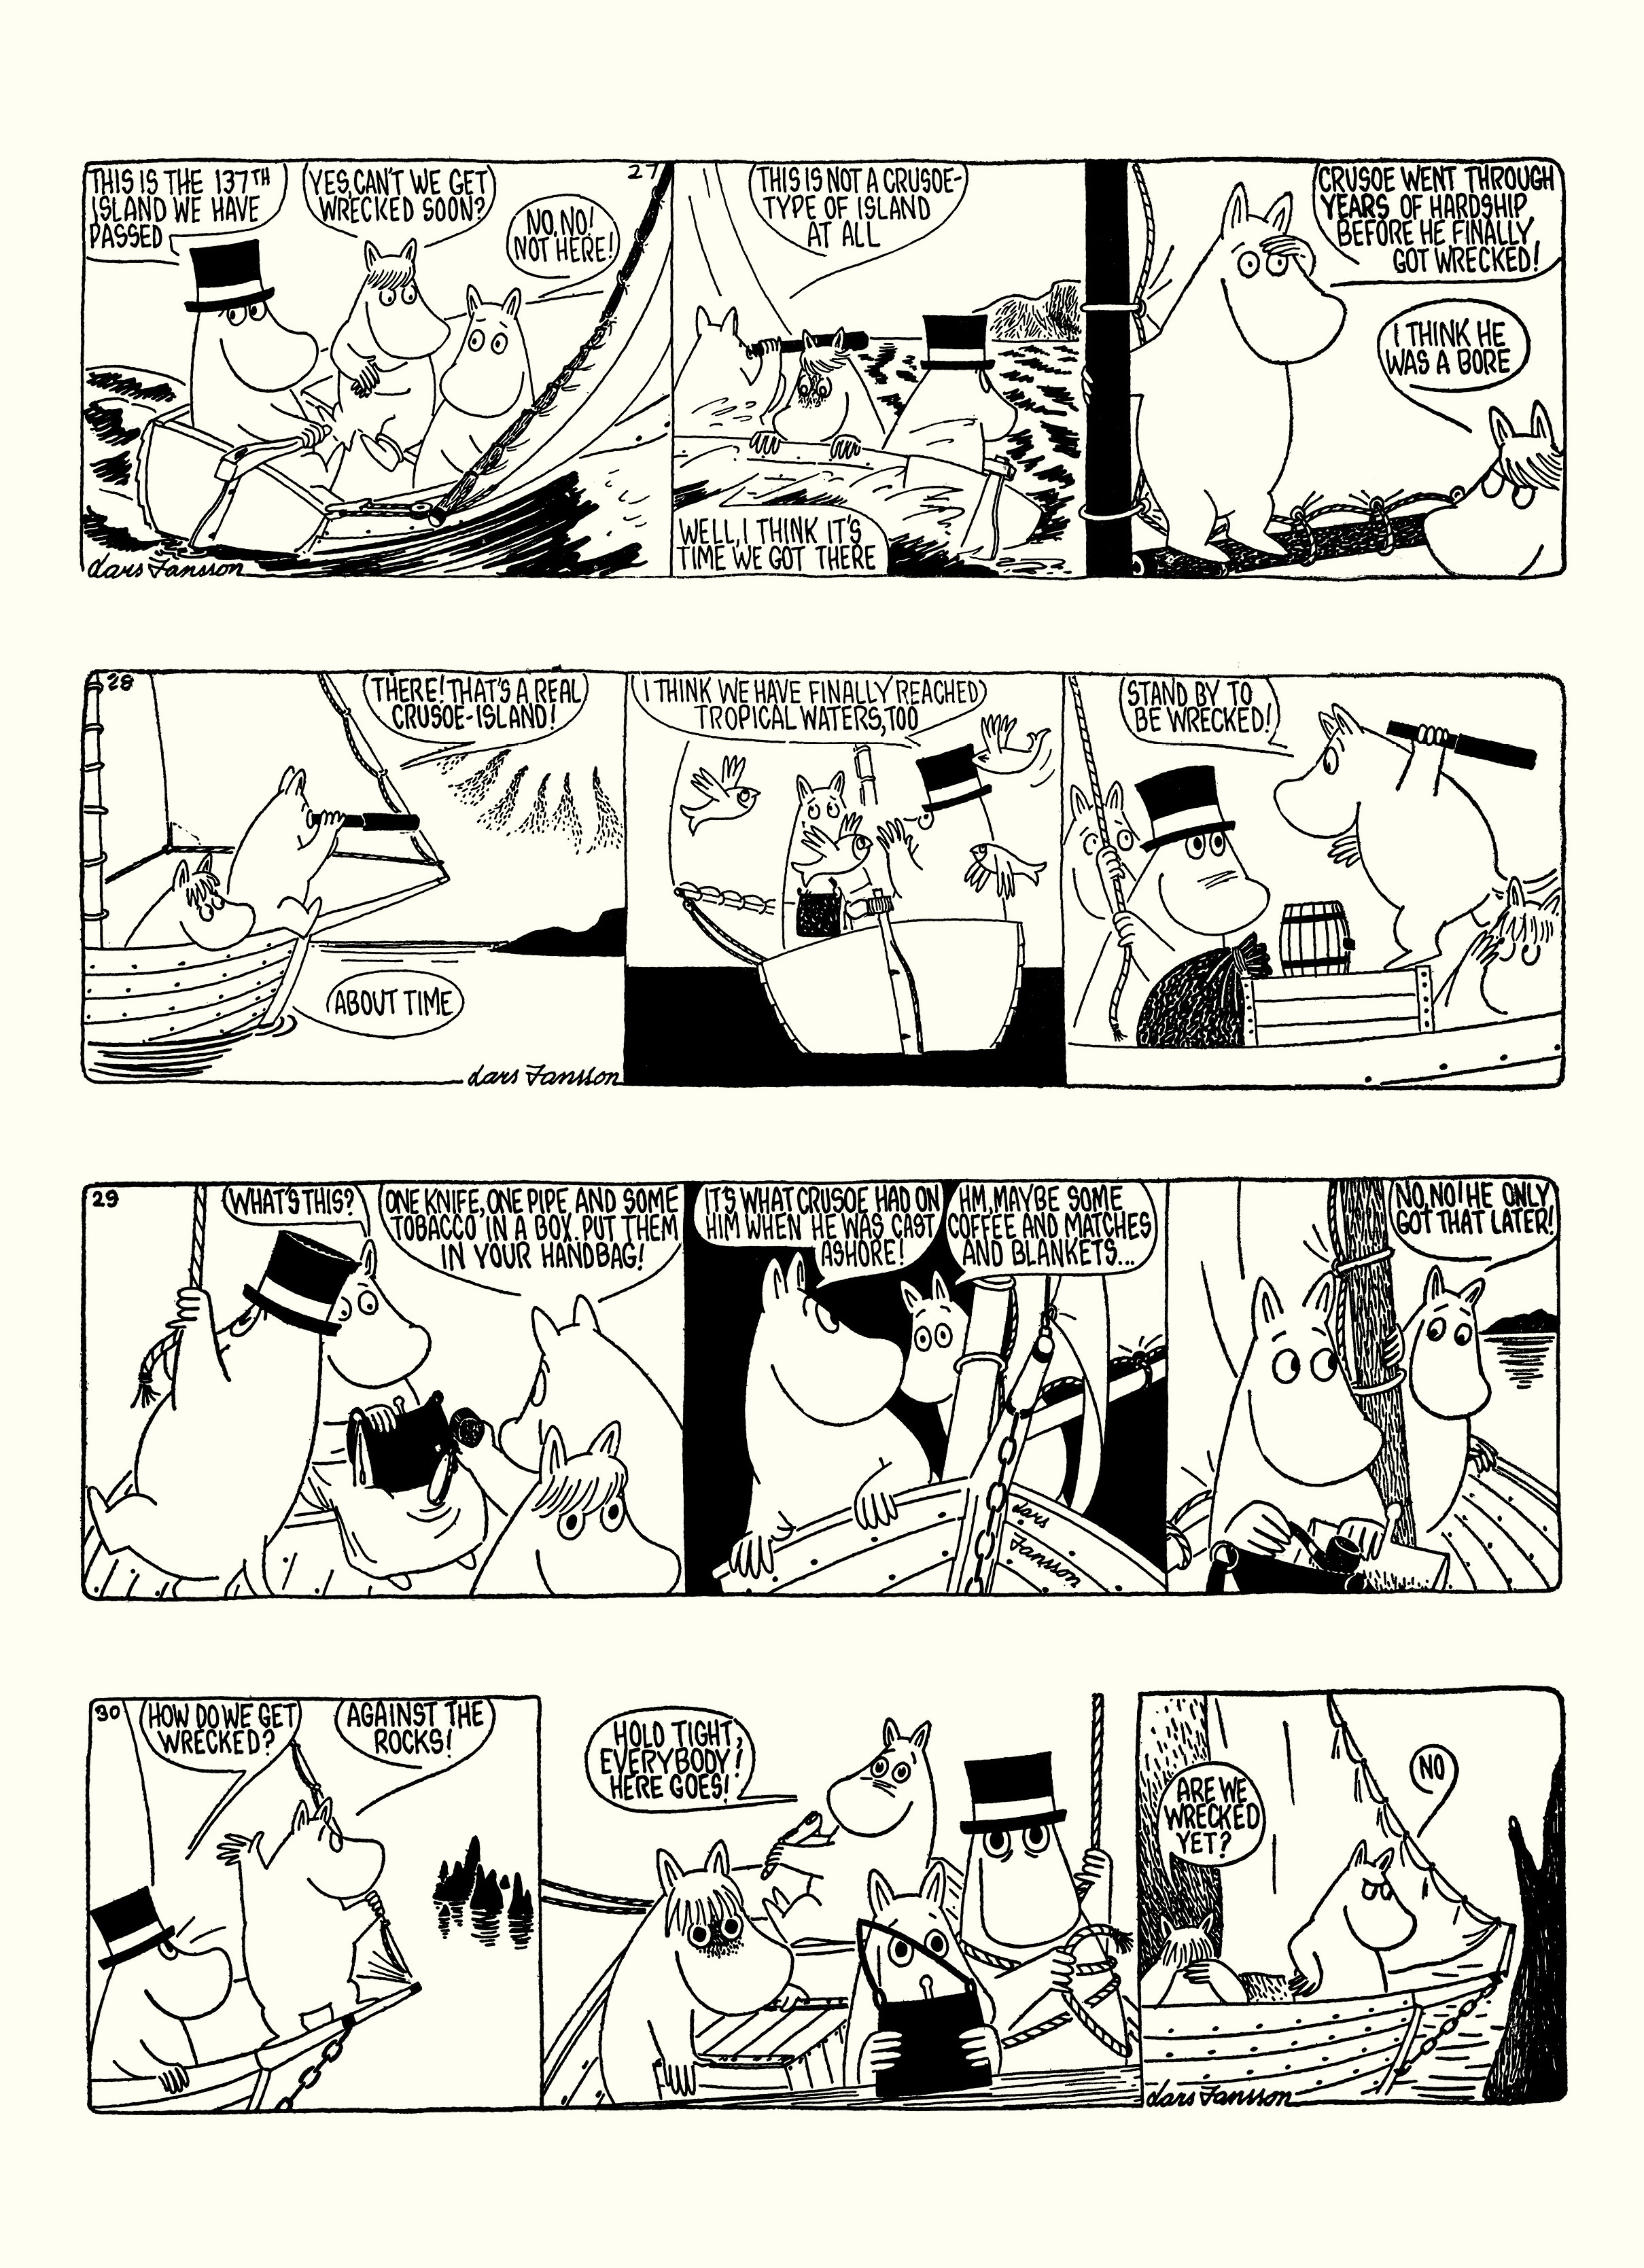 Read online Moomin: The Complete Lars Jansson Comic Strip comic -  Issue # TPB 8 - 12